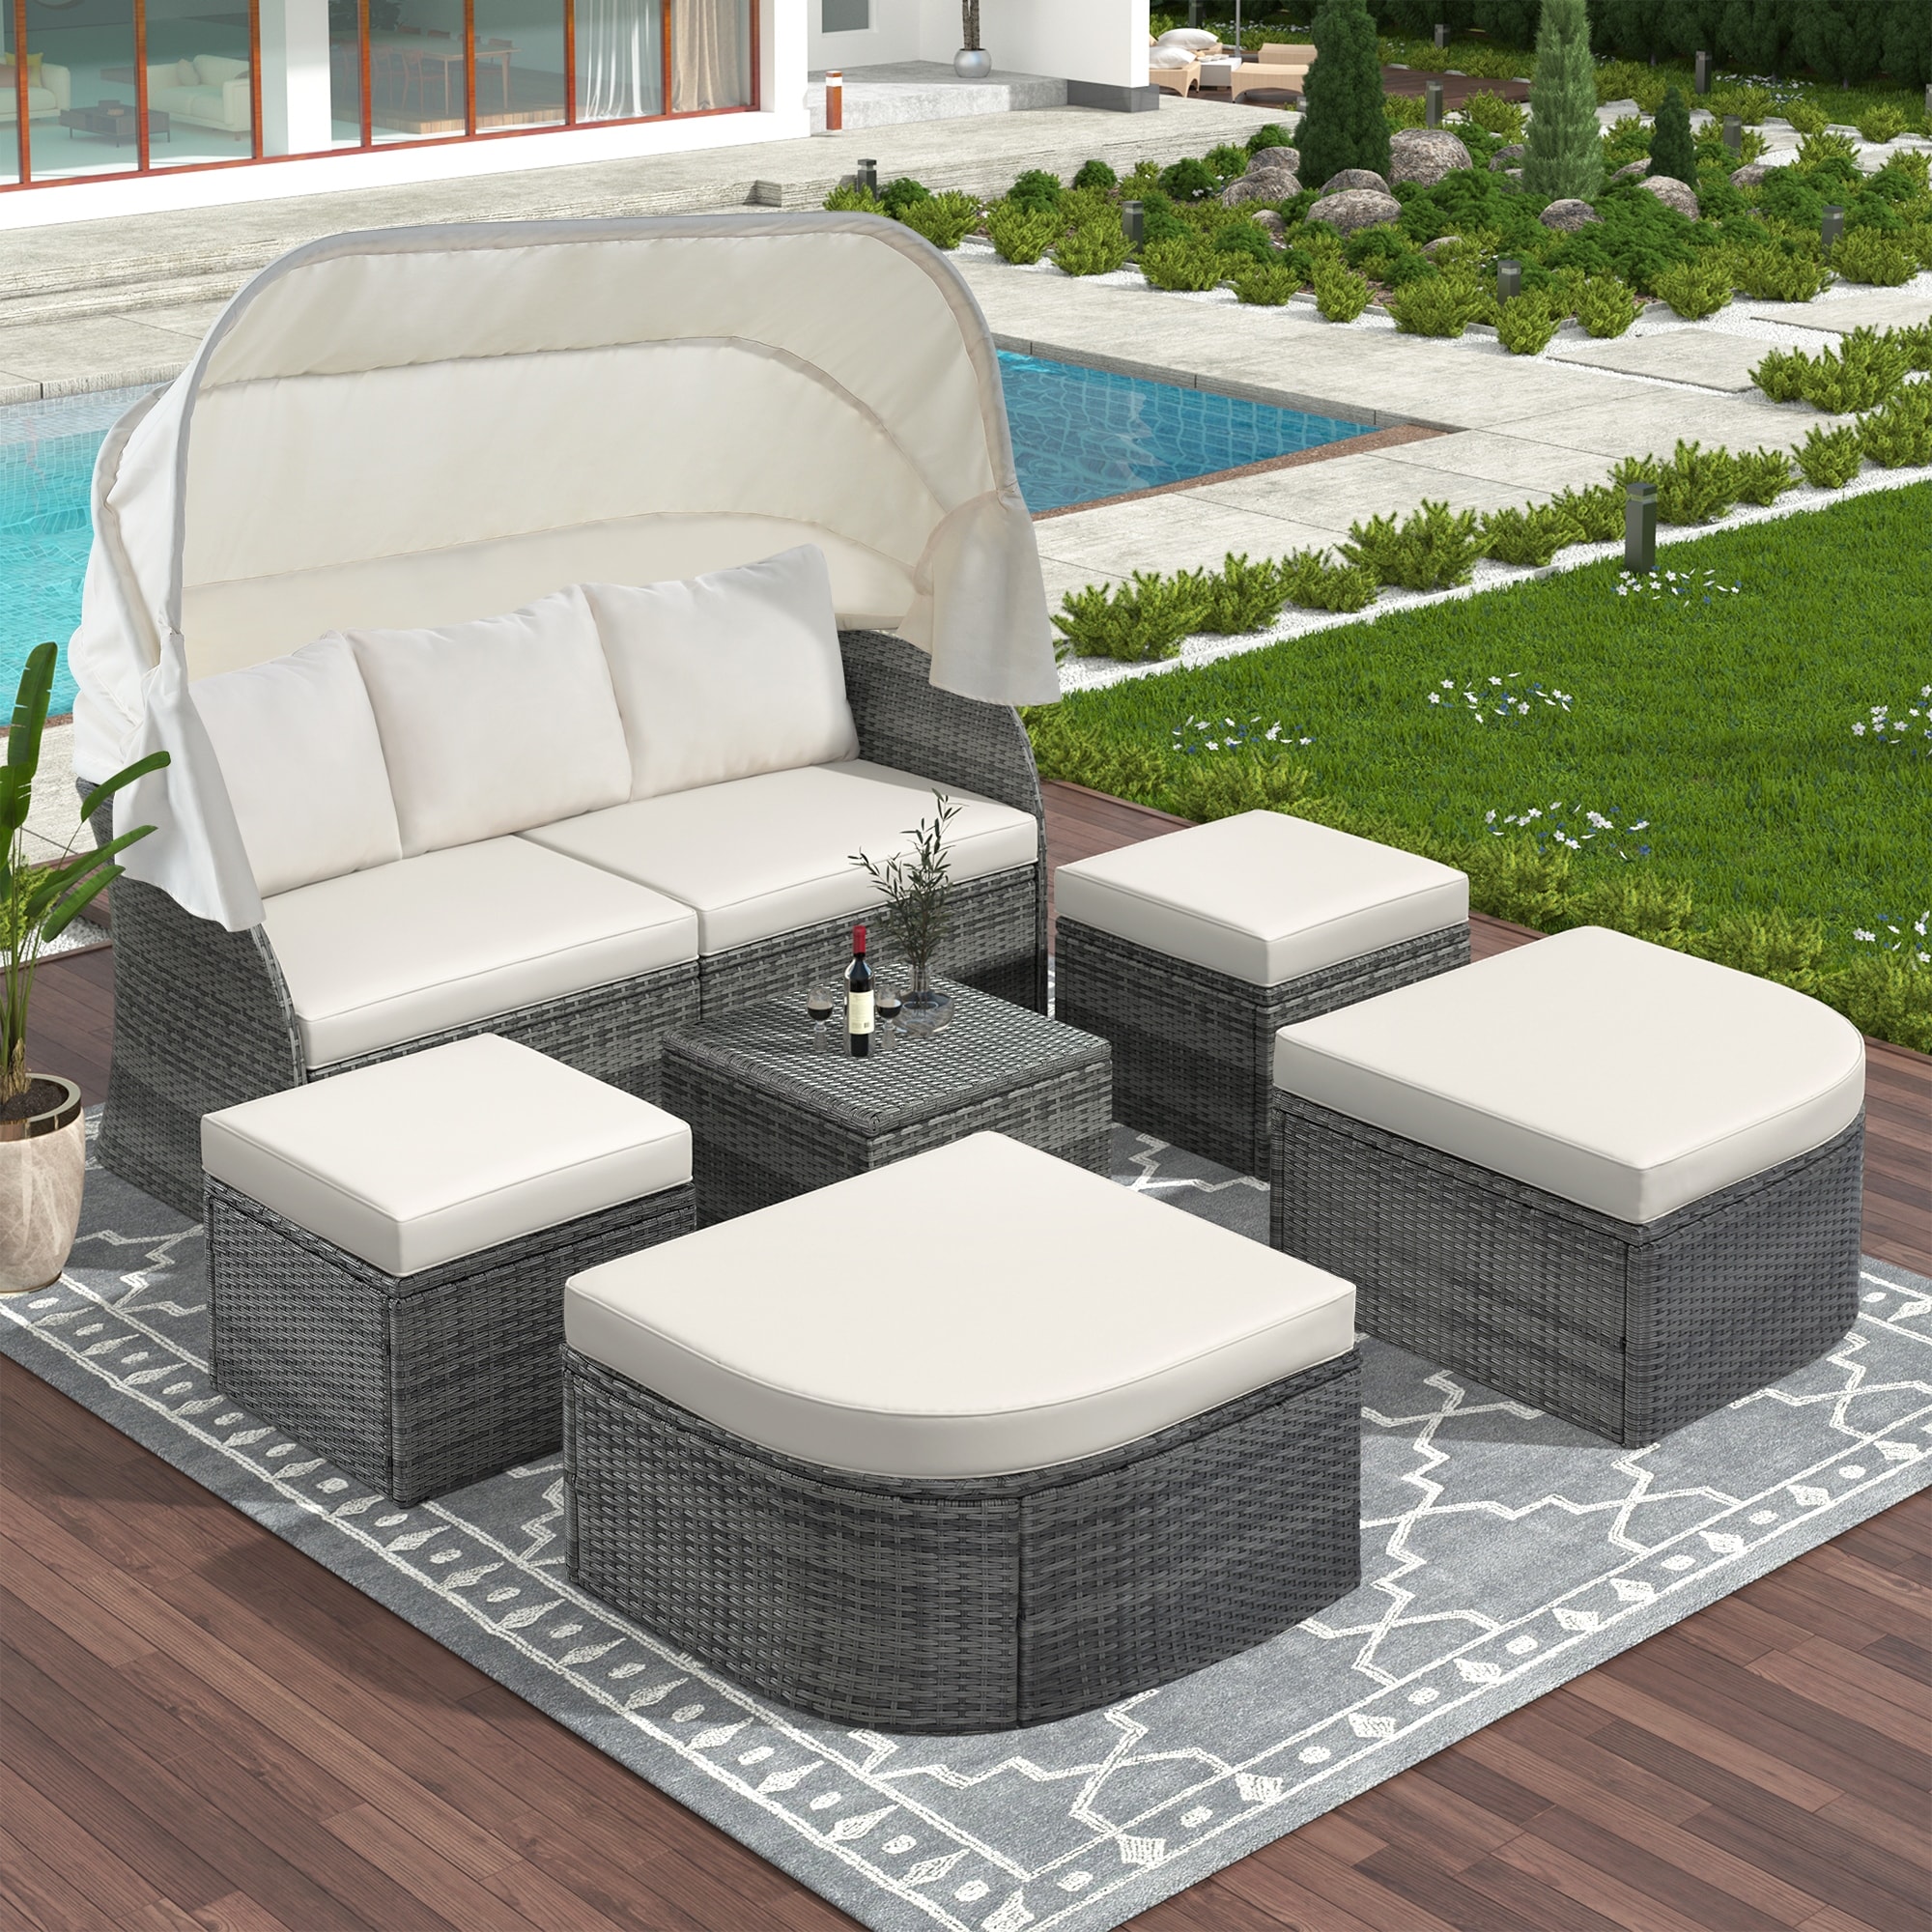 Outdoor Pe Rattan Wicker Daybed Conversation Set With Flip-type Canopy